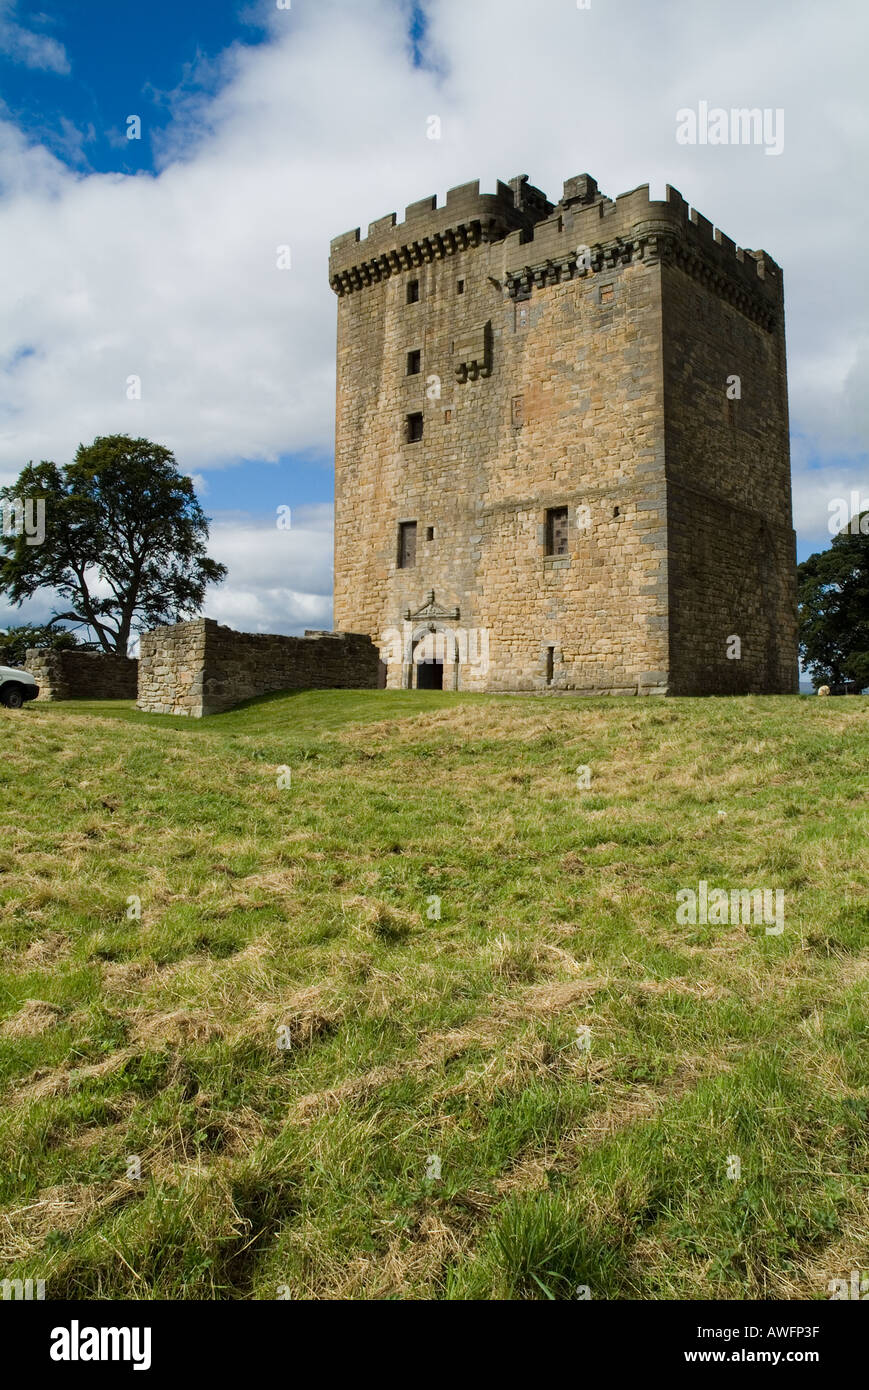 dh Clackmannan Tower CLACKMANNAN CLACKMANNAN Scotland Tower castle house Kings Seat Hill clackmannanshire Stock Photo